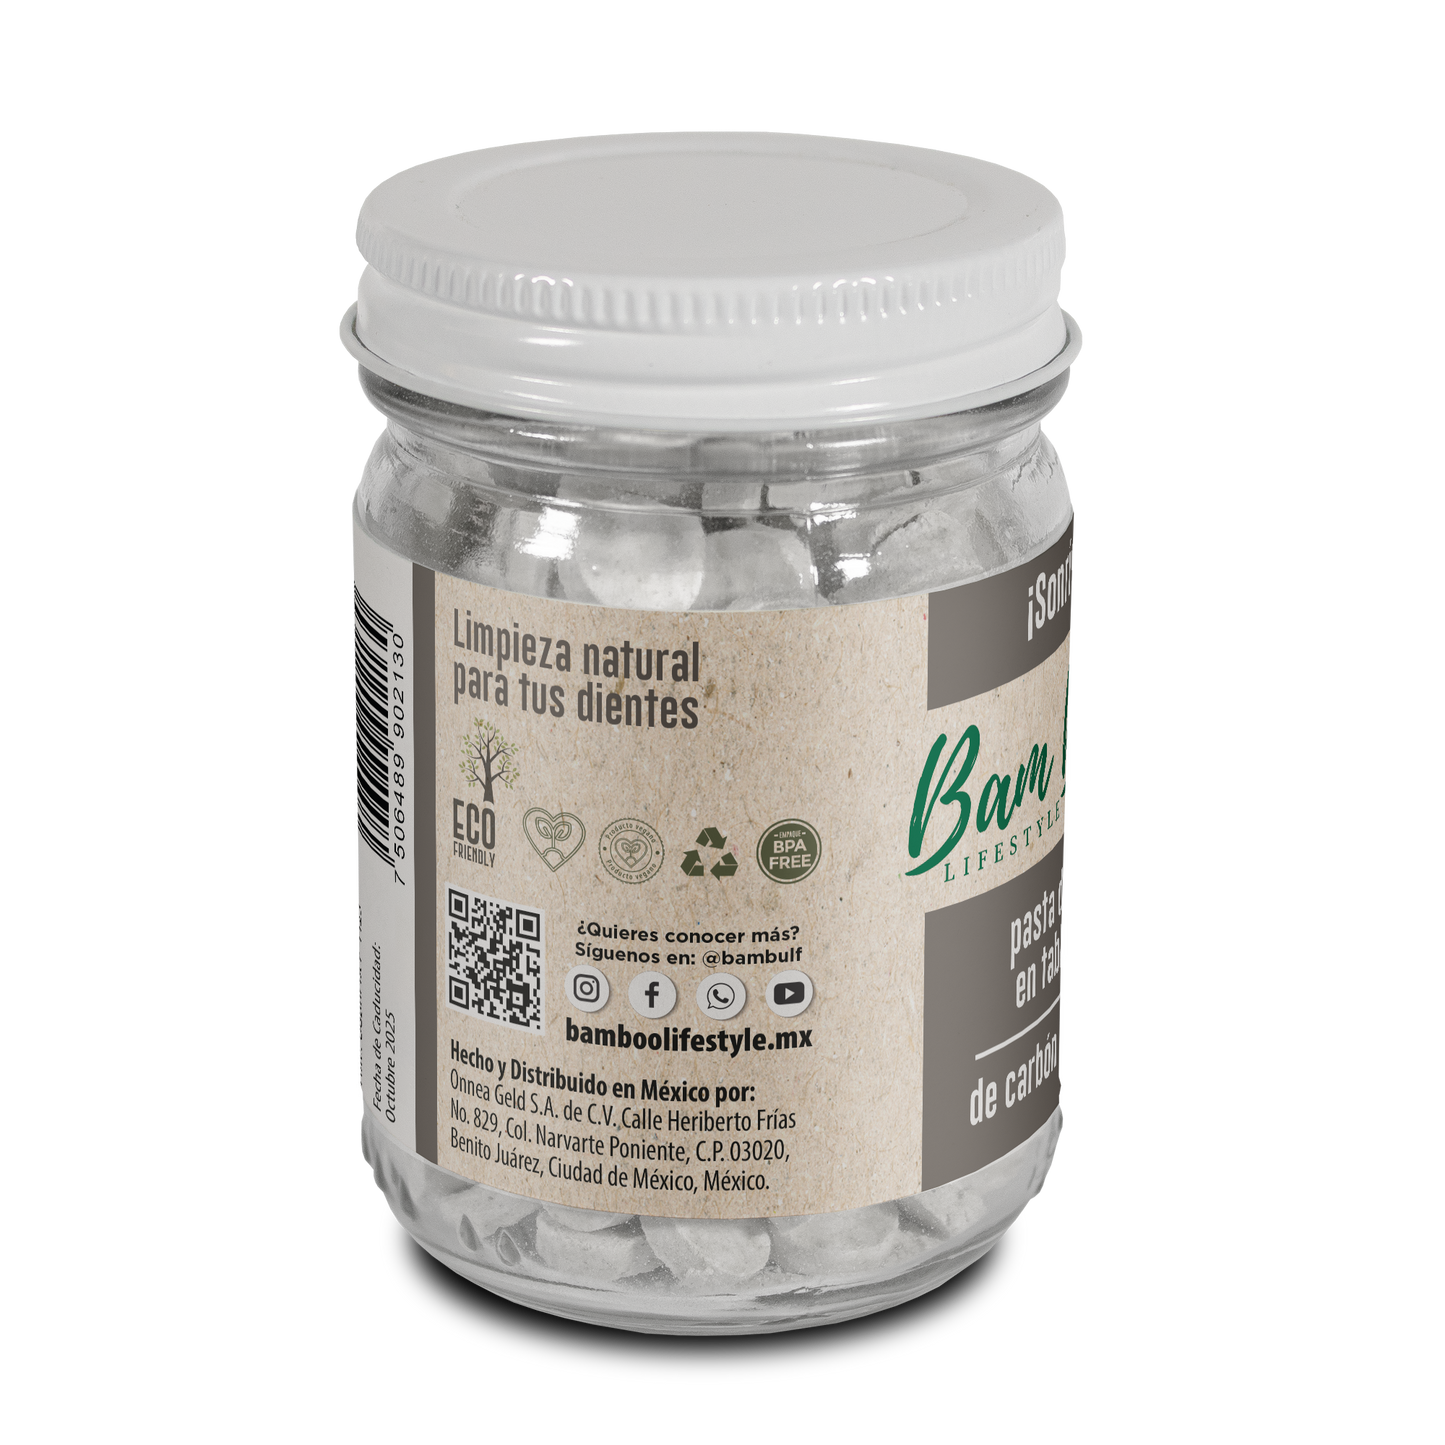 Solid Toothpaste Jar 75g Bam Boo! Lifestyle | Activated carbon